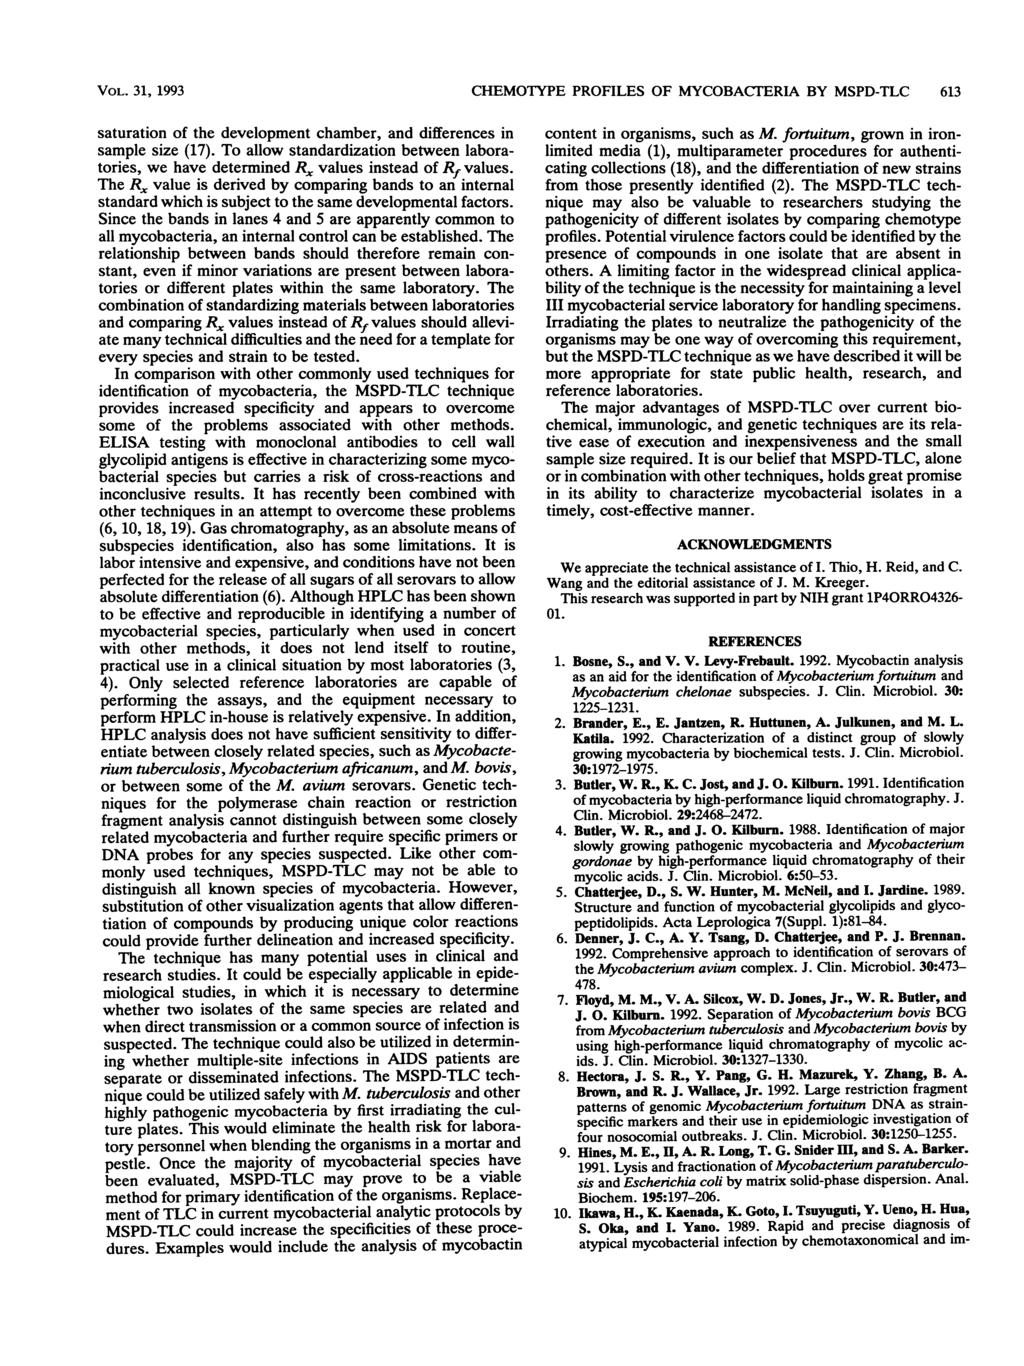 VOL. 31, 1993 CHEMOTYPE PROFILES OF MYCOBAC1ERIA BY MSPD-TLC 613 saturation of the development chamber, and differences in sample size (17).